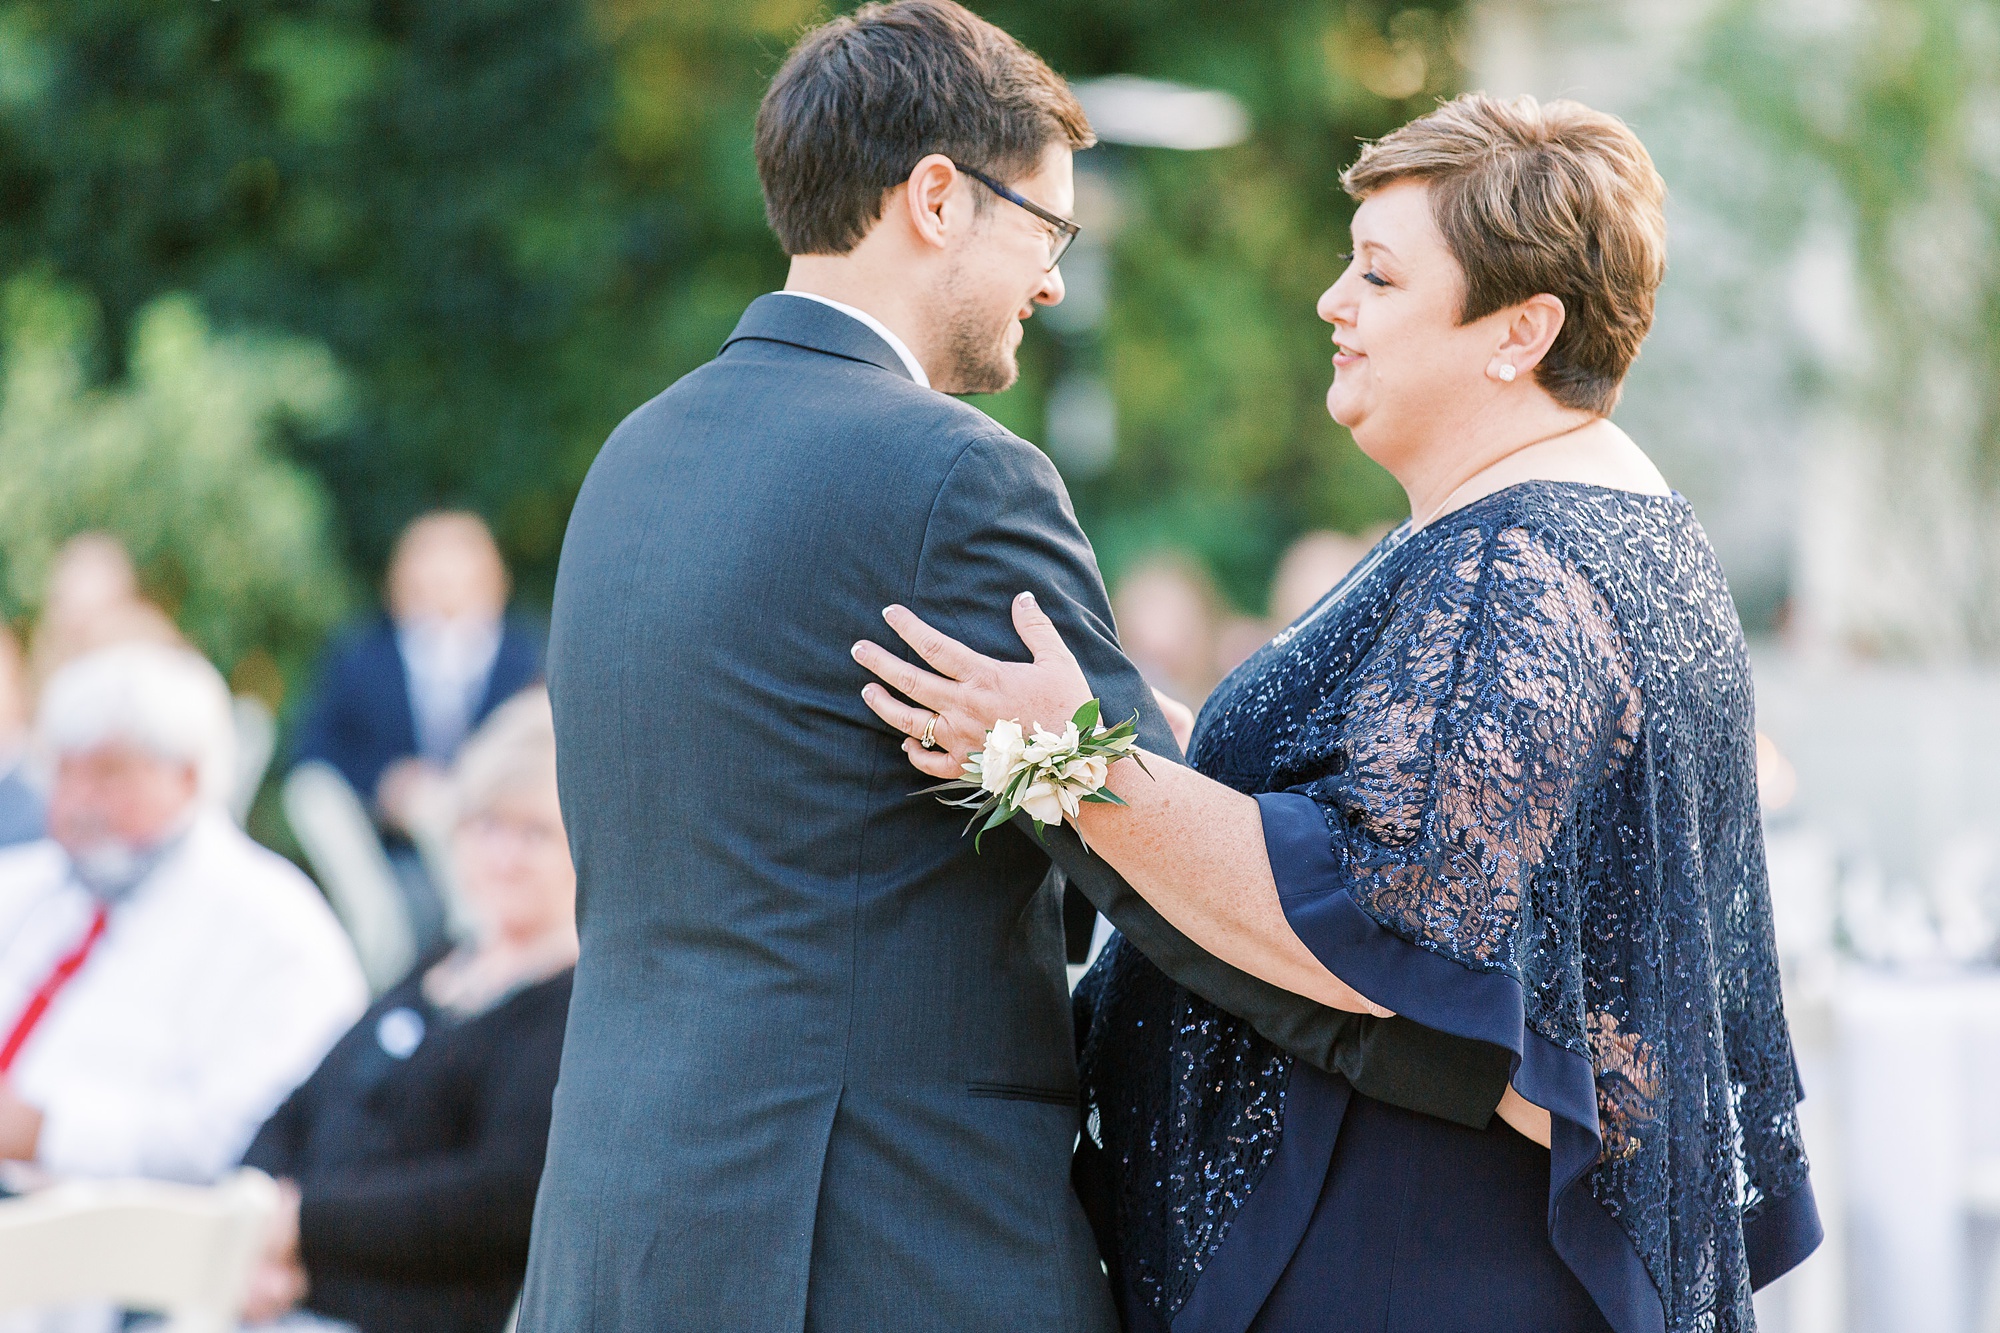 mother-son dance during outdoor reception at Separk Mansion